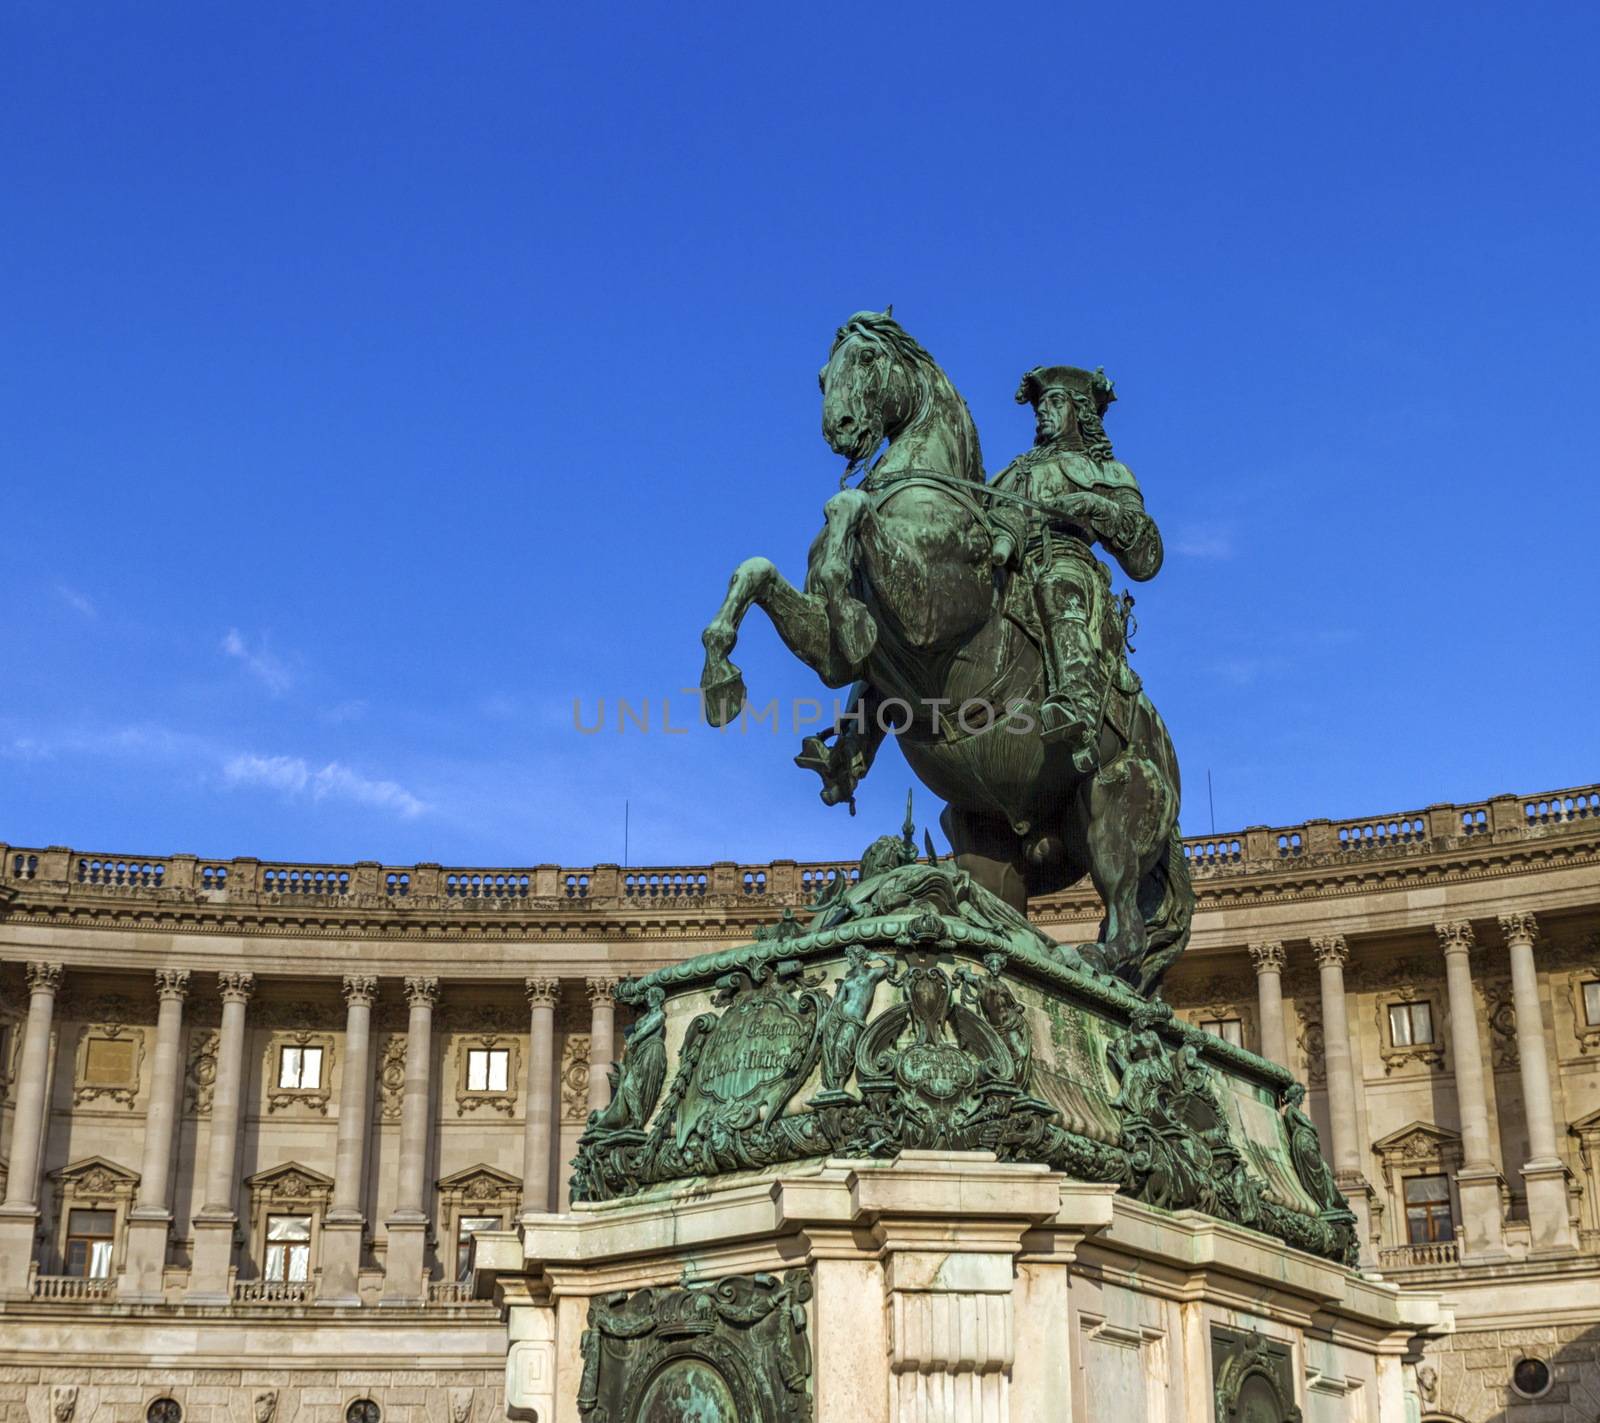 Statue of Prince Eugene by day, Hofburg Palace, Vienna, Austria